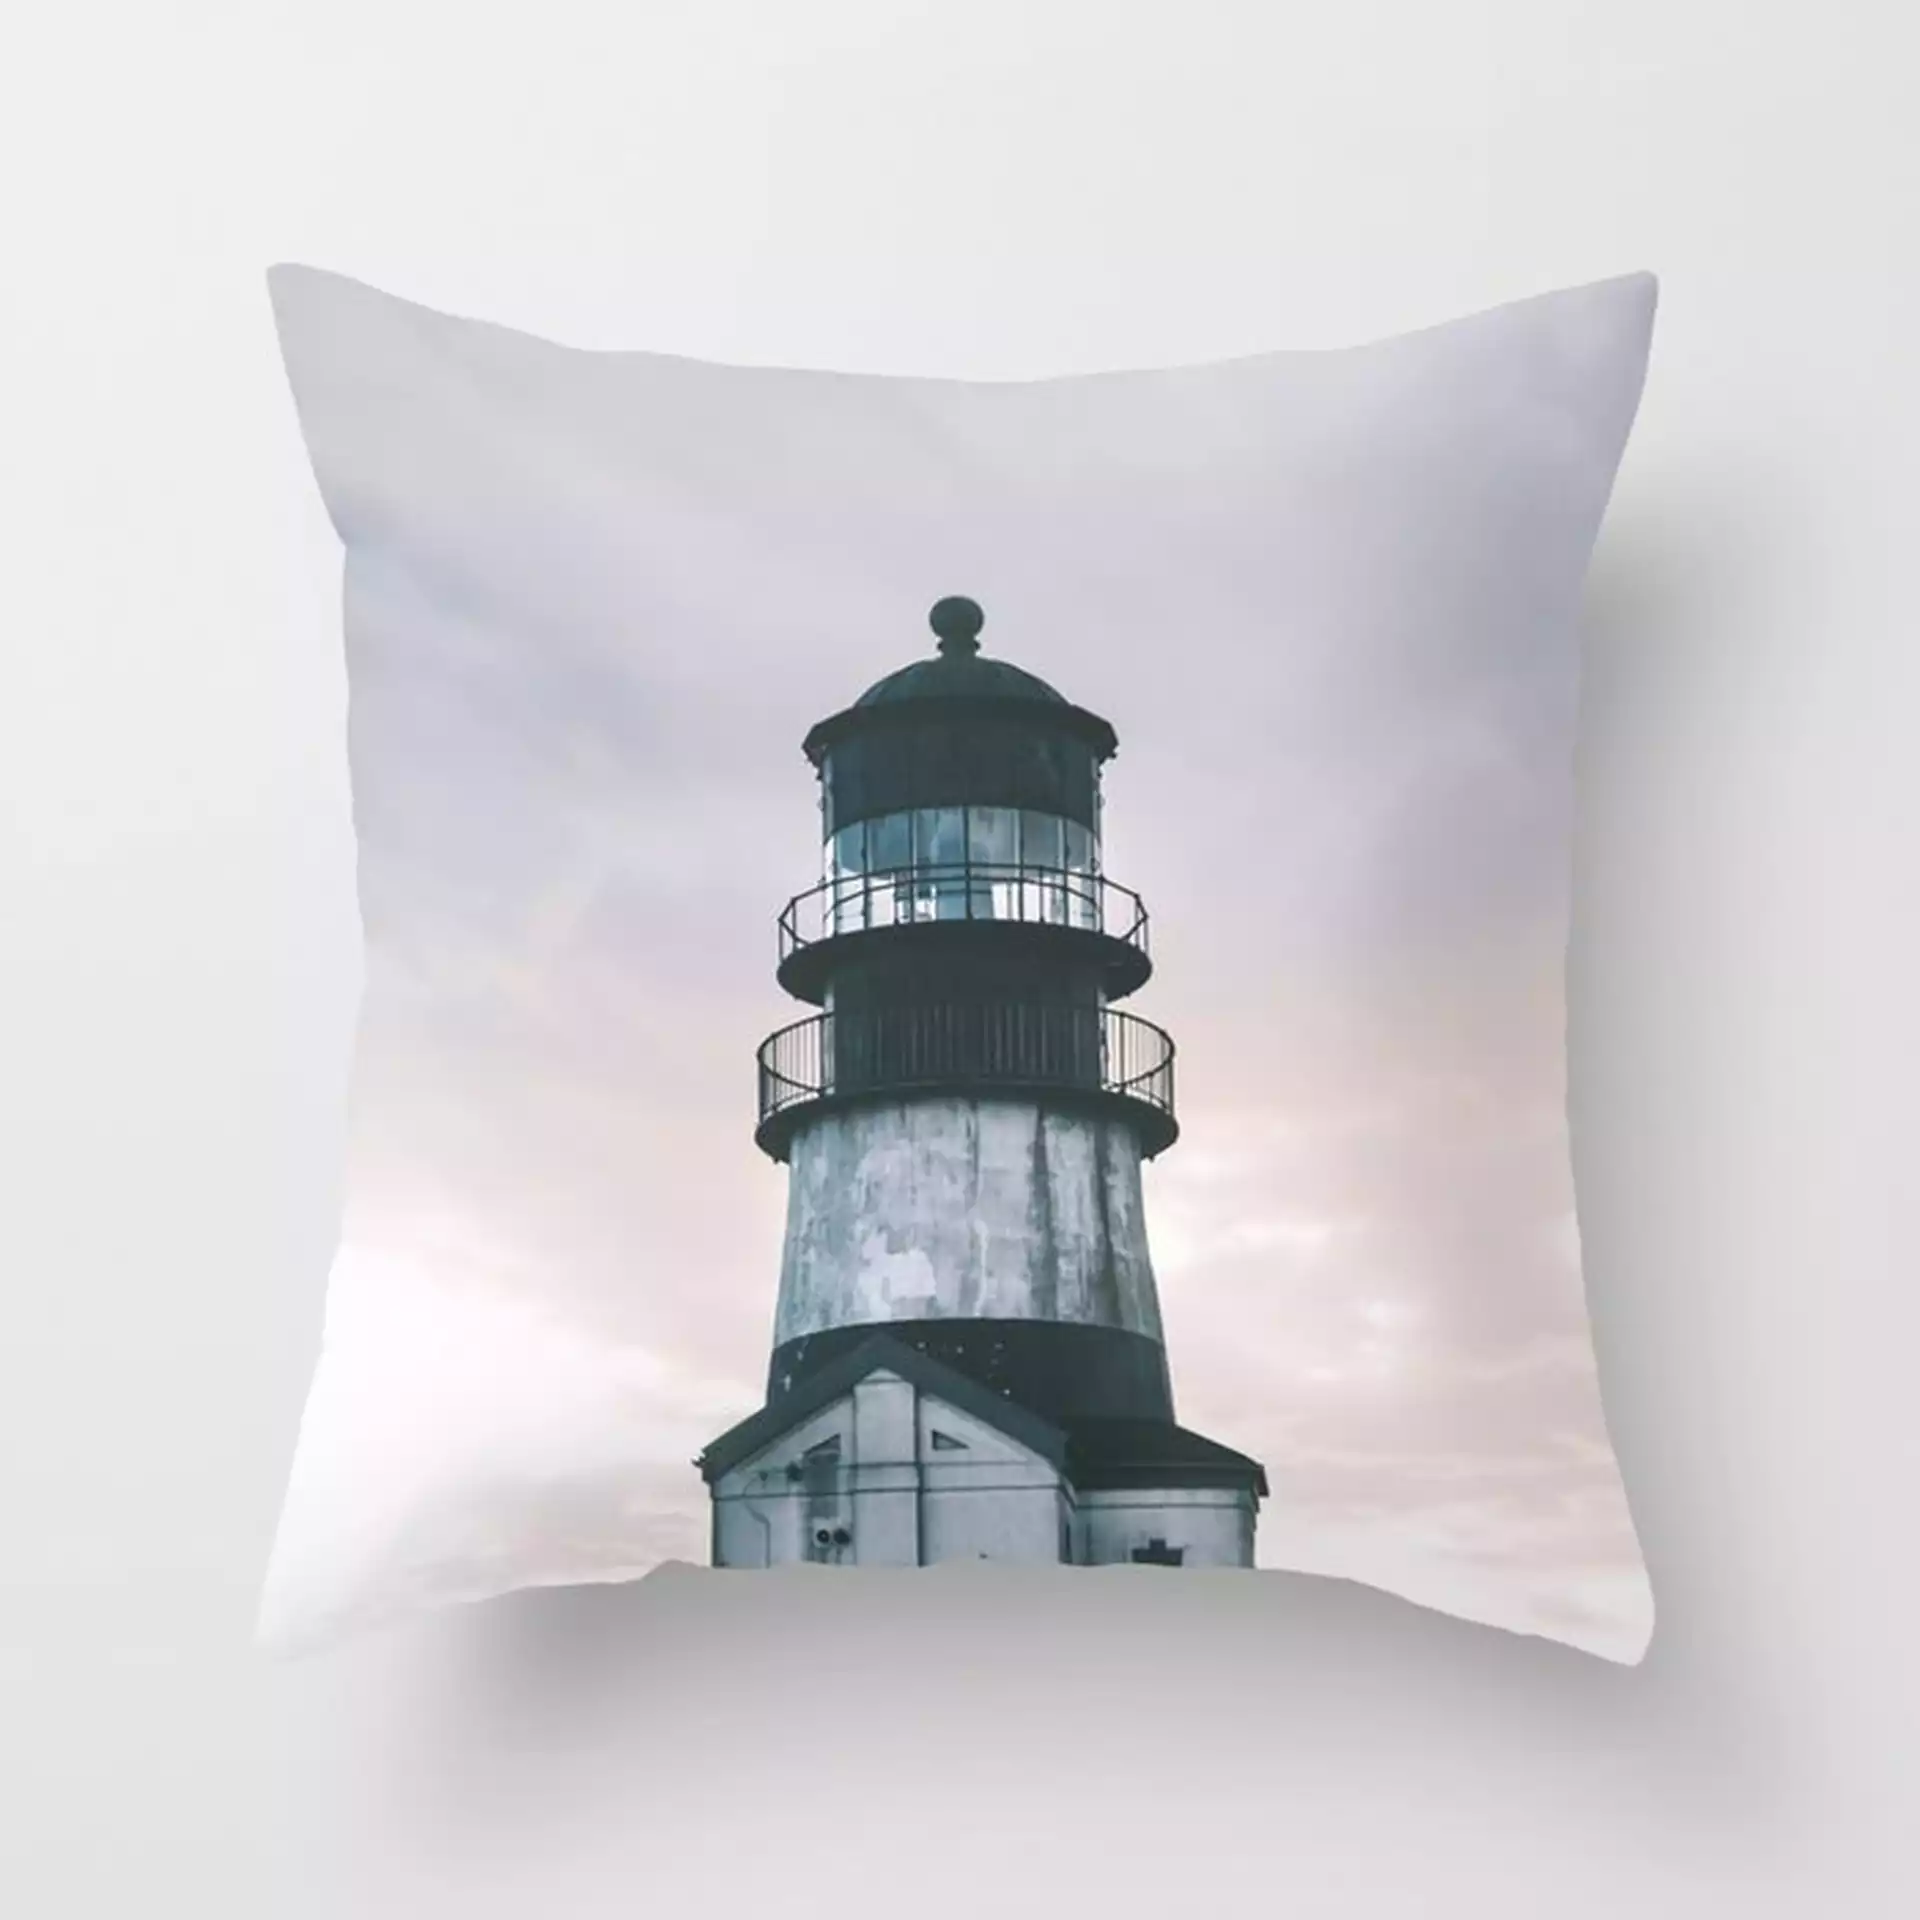 Washington Lighthouse Couch Throw Pillow by Hannah Kemp - Cover (18" x 18") with pillow insert - Outdoor Pillow